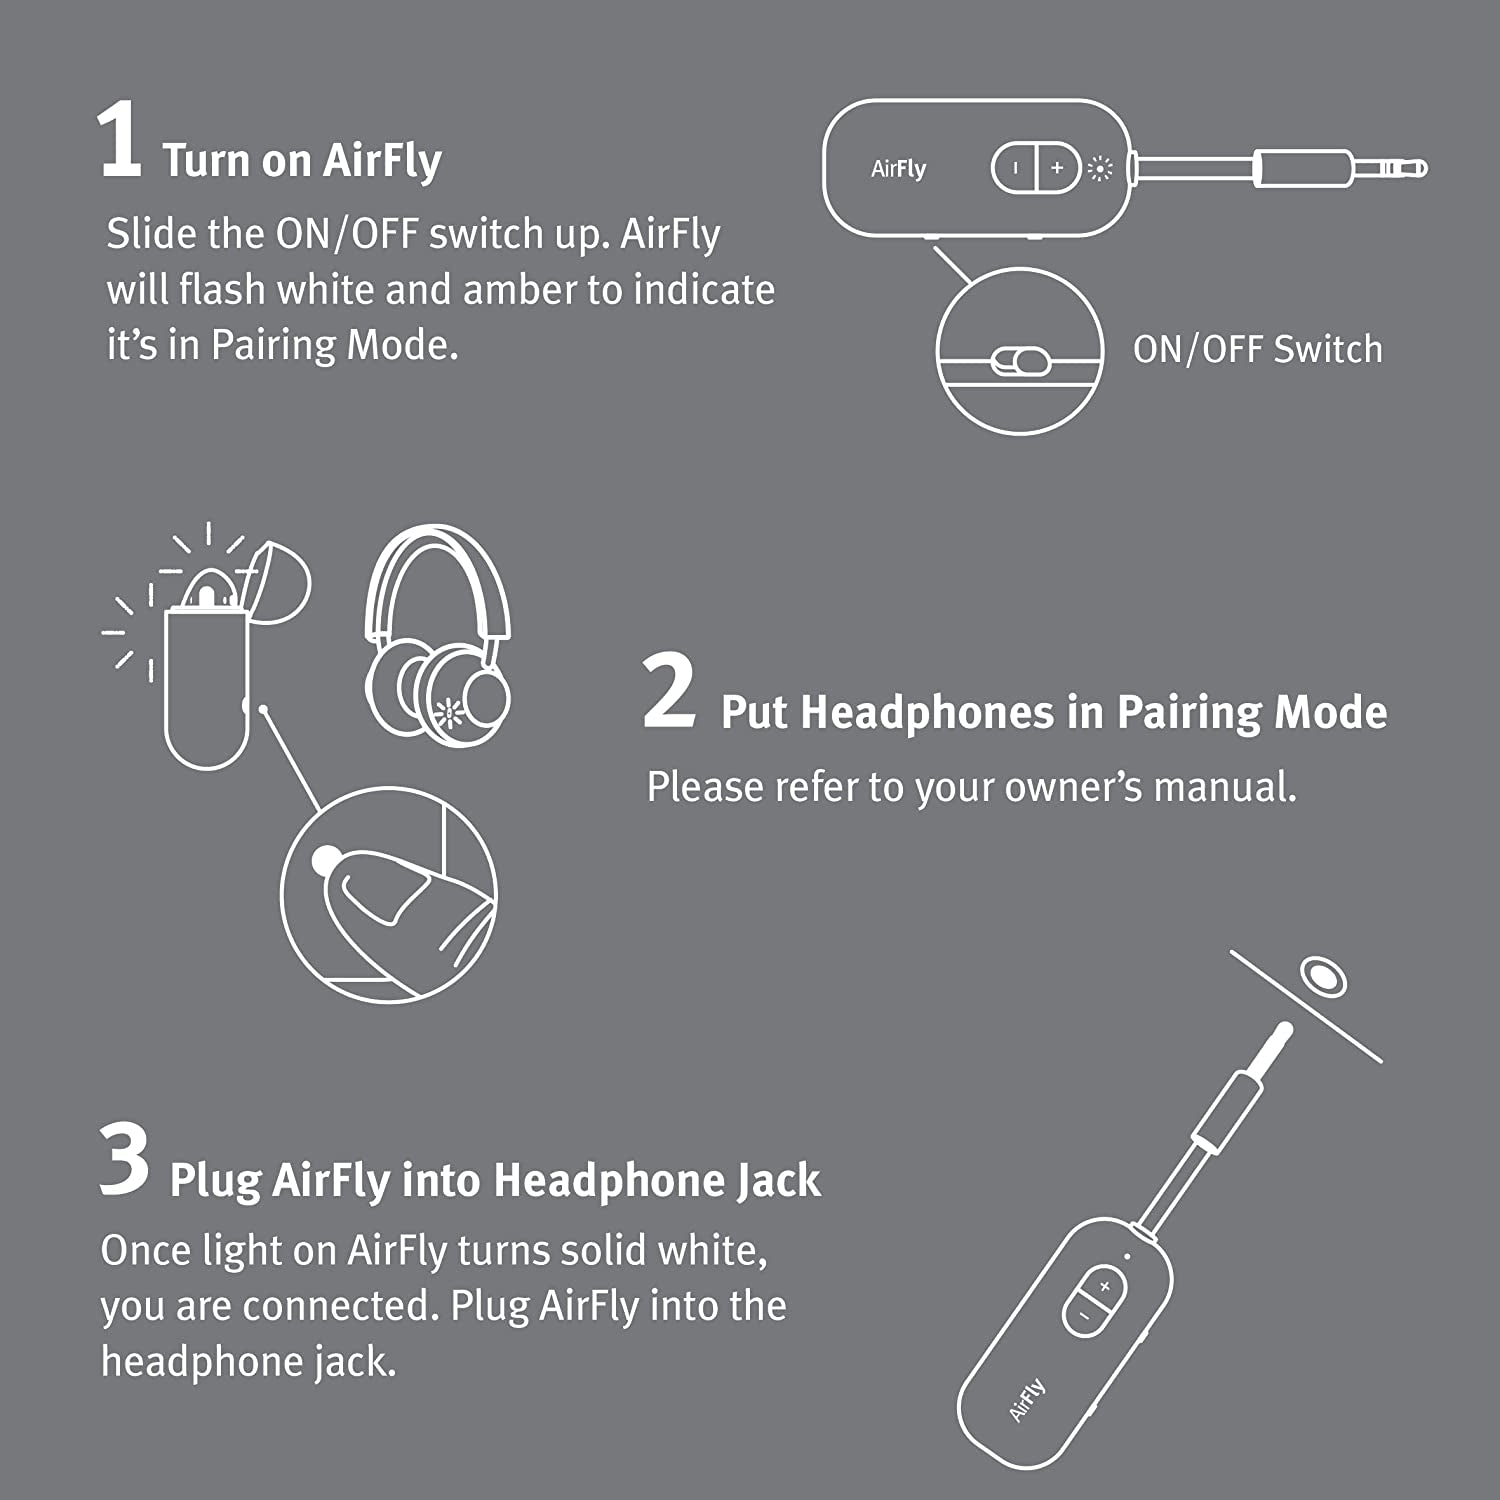 Airfly SE, Bluetooth Wireless Audio Transmitter for Airpods/Wireless or Noise-Cancelling Headphones Use with Any 3.5 Mm Audio Jack on Airplanes, Gym Equipment or Ipad/Tablets